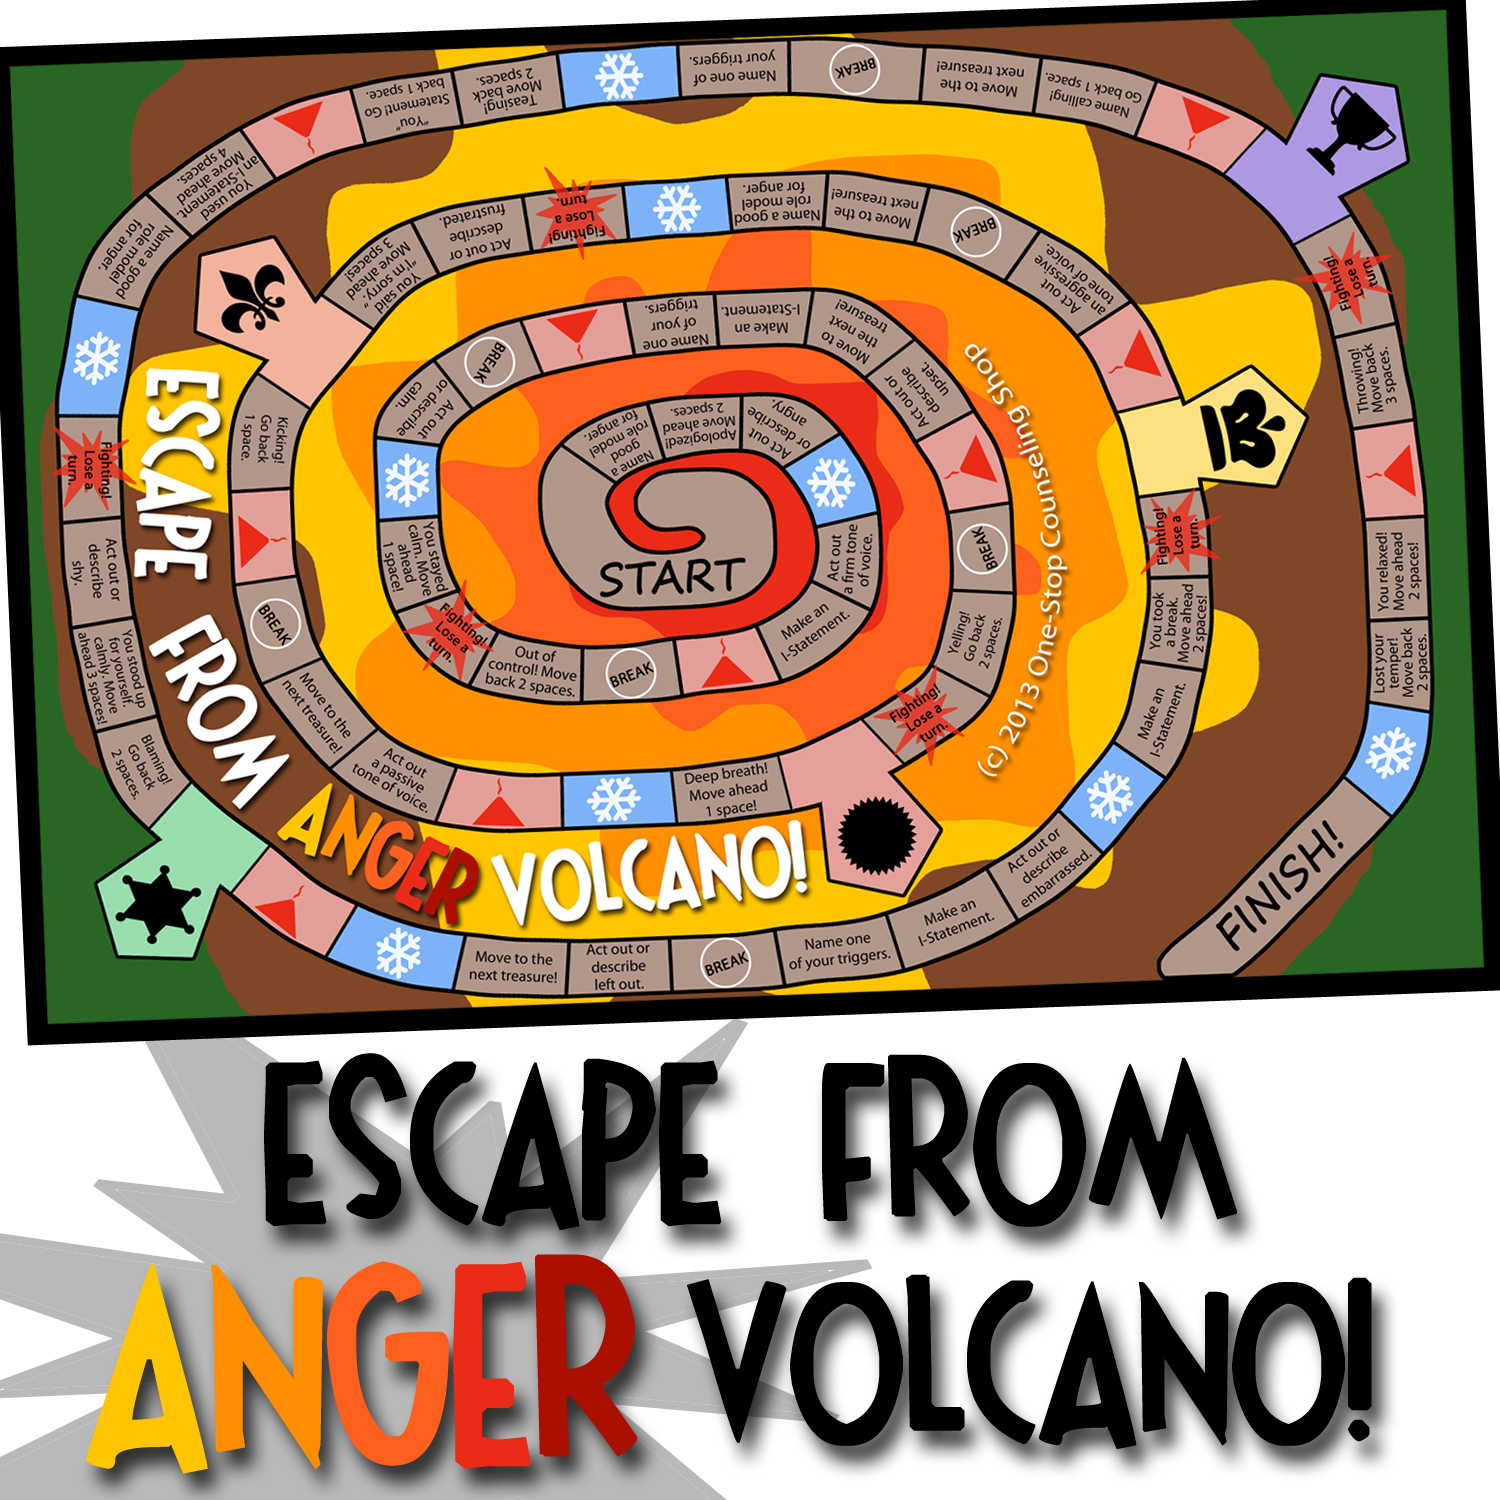 Escape from Anger Volcano